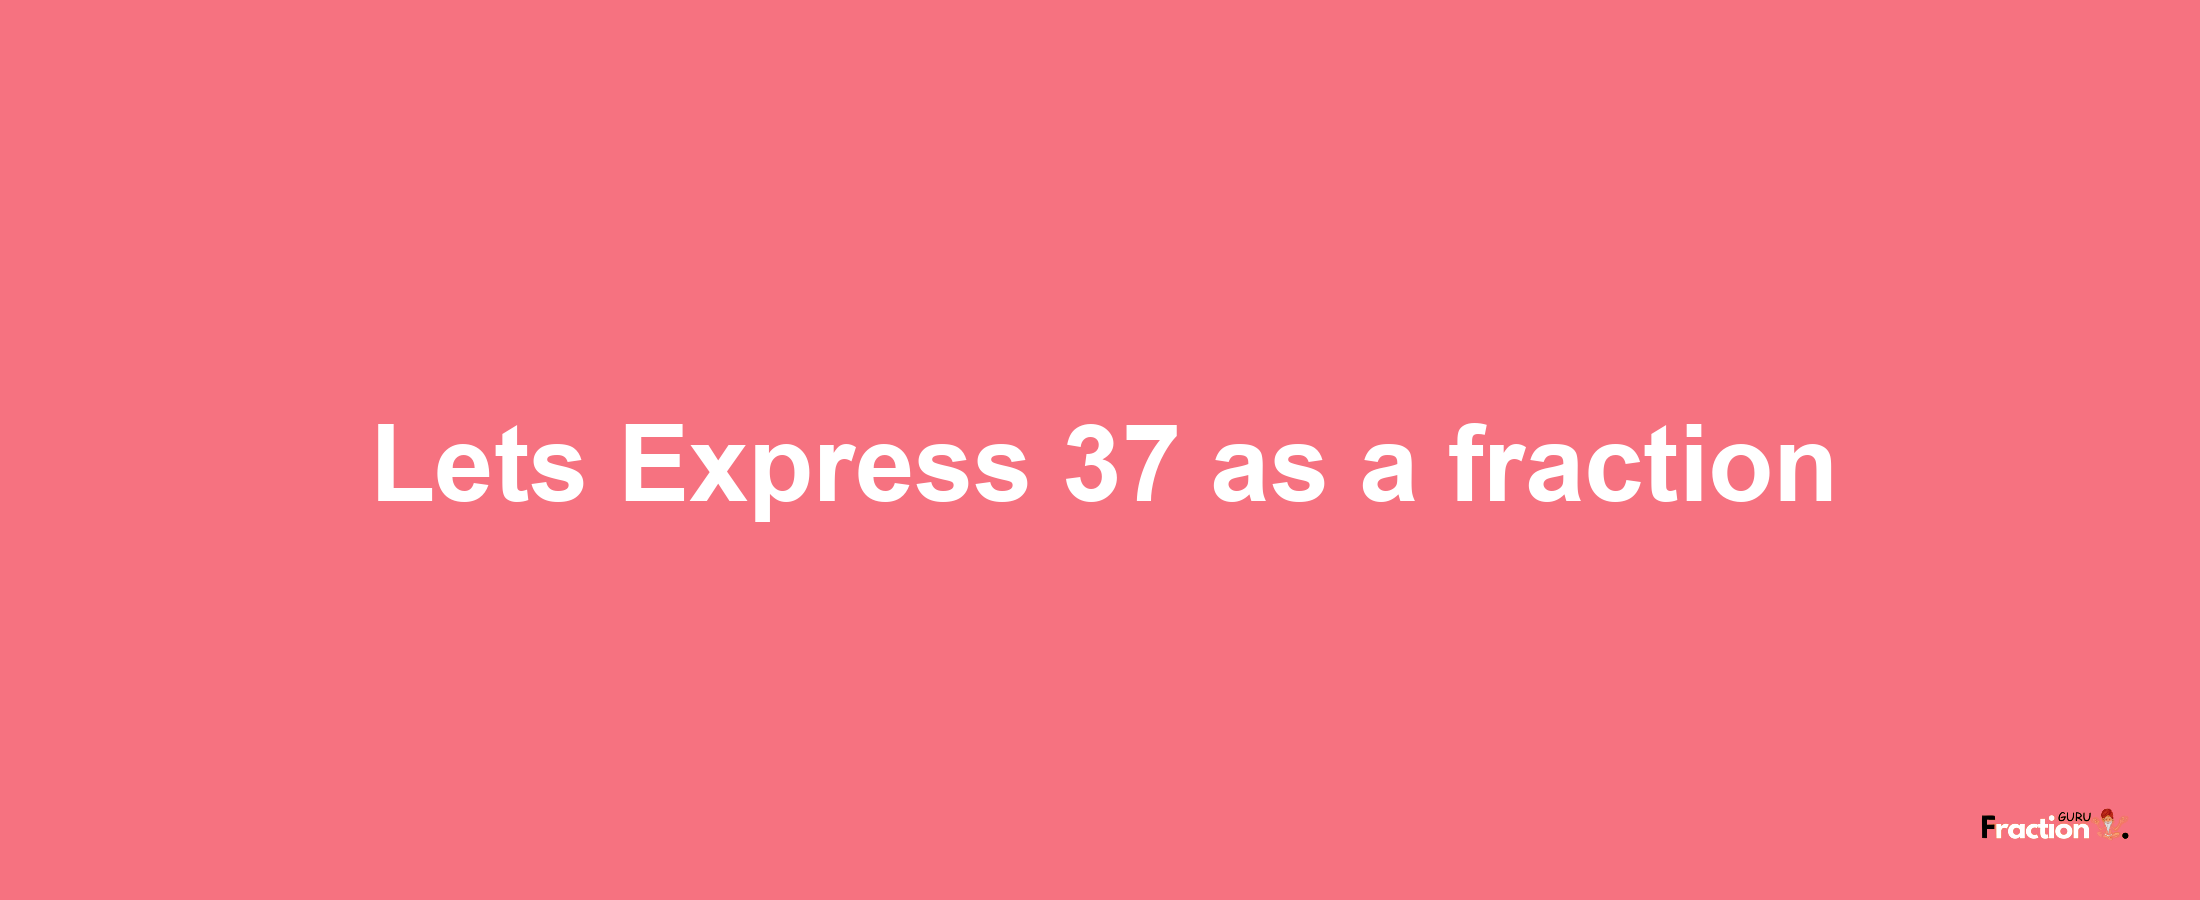 Lets Express 37 as afraction